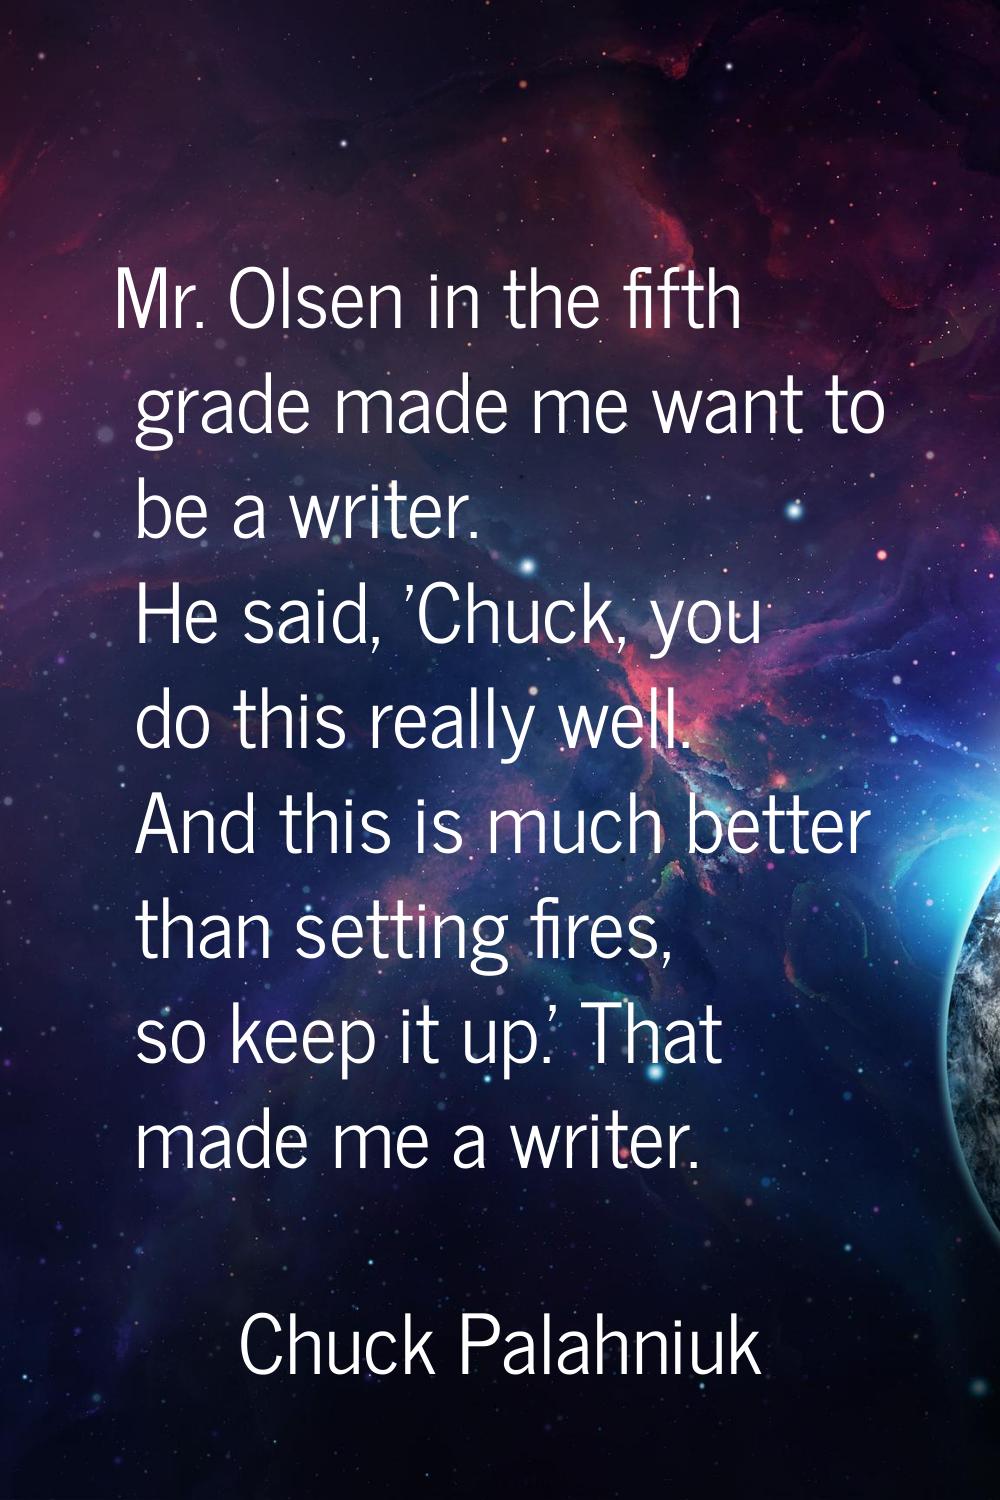 Mr. Olsen in the fifth grade made me want to be a writer. He said, 'Chuck, you do this really well.